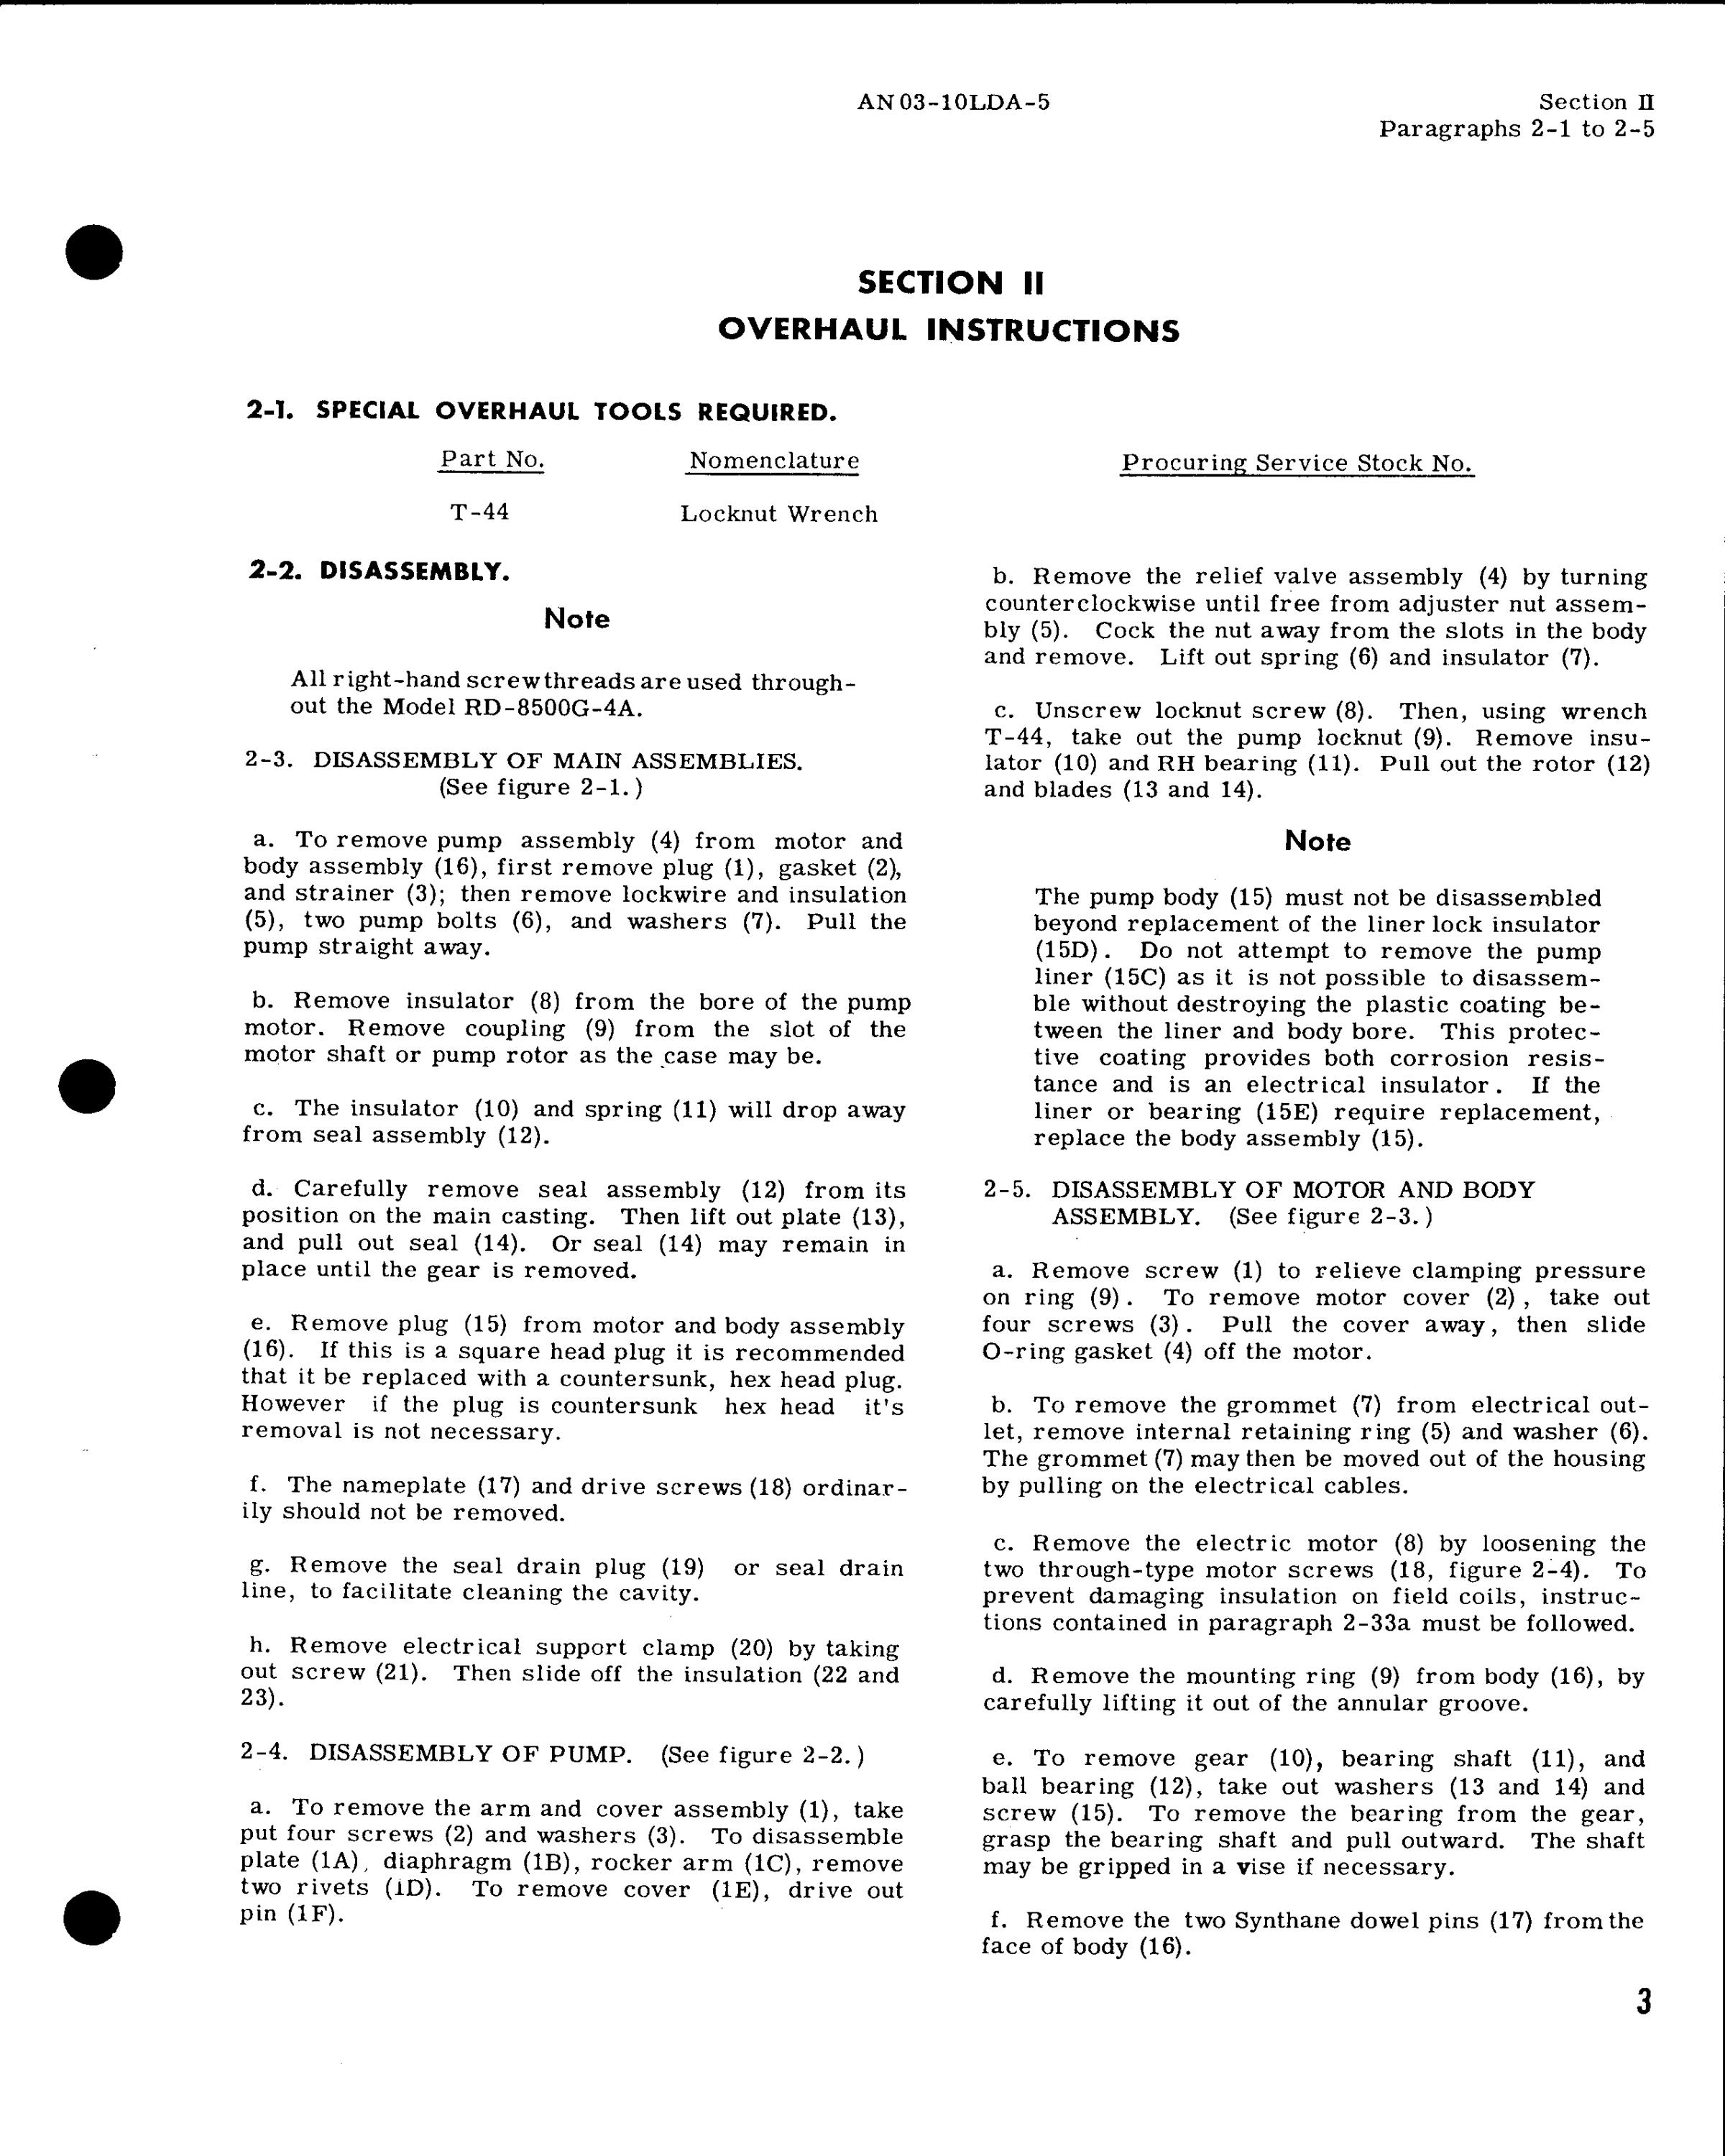 Sample page 9 from AirCorps Library document: Overhaul Instructions for Water Injection Pumps Series RD-8500 (Lear-Romec)